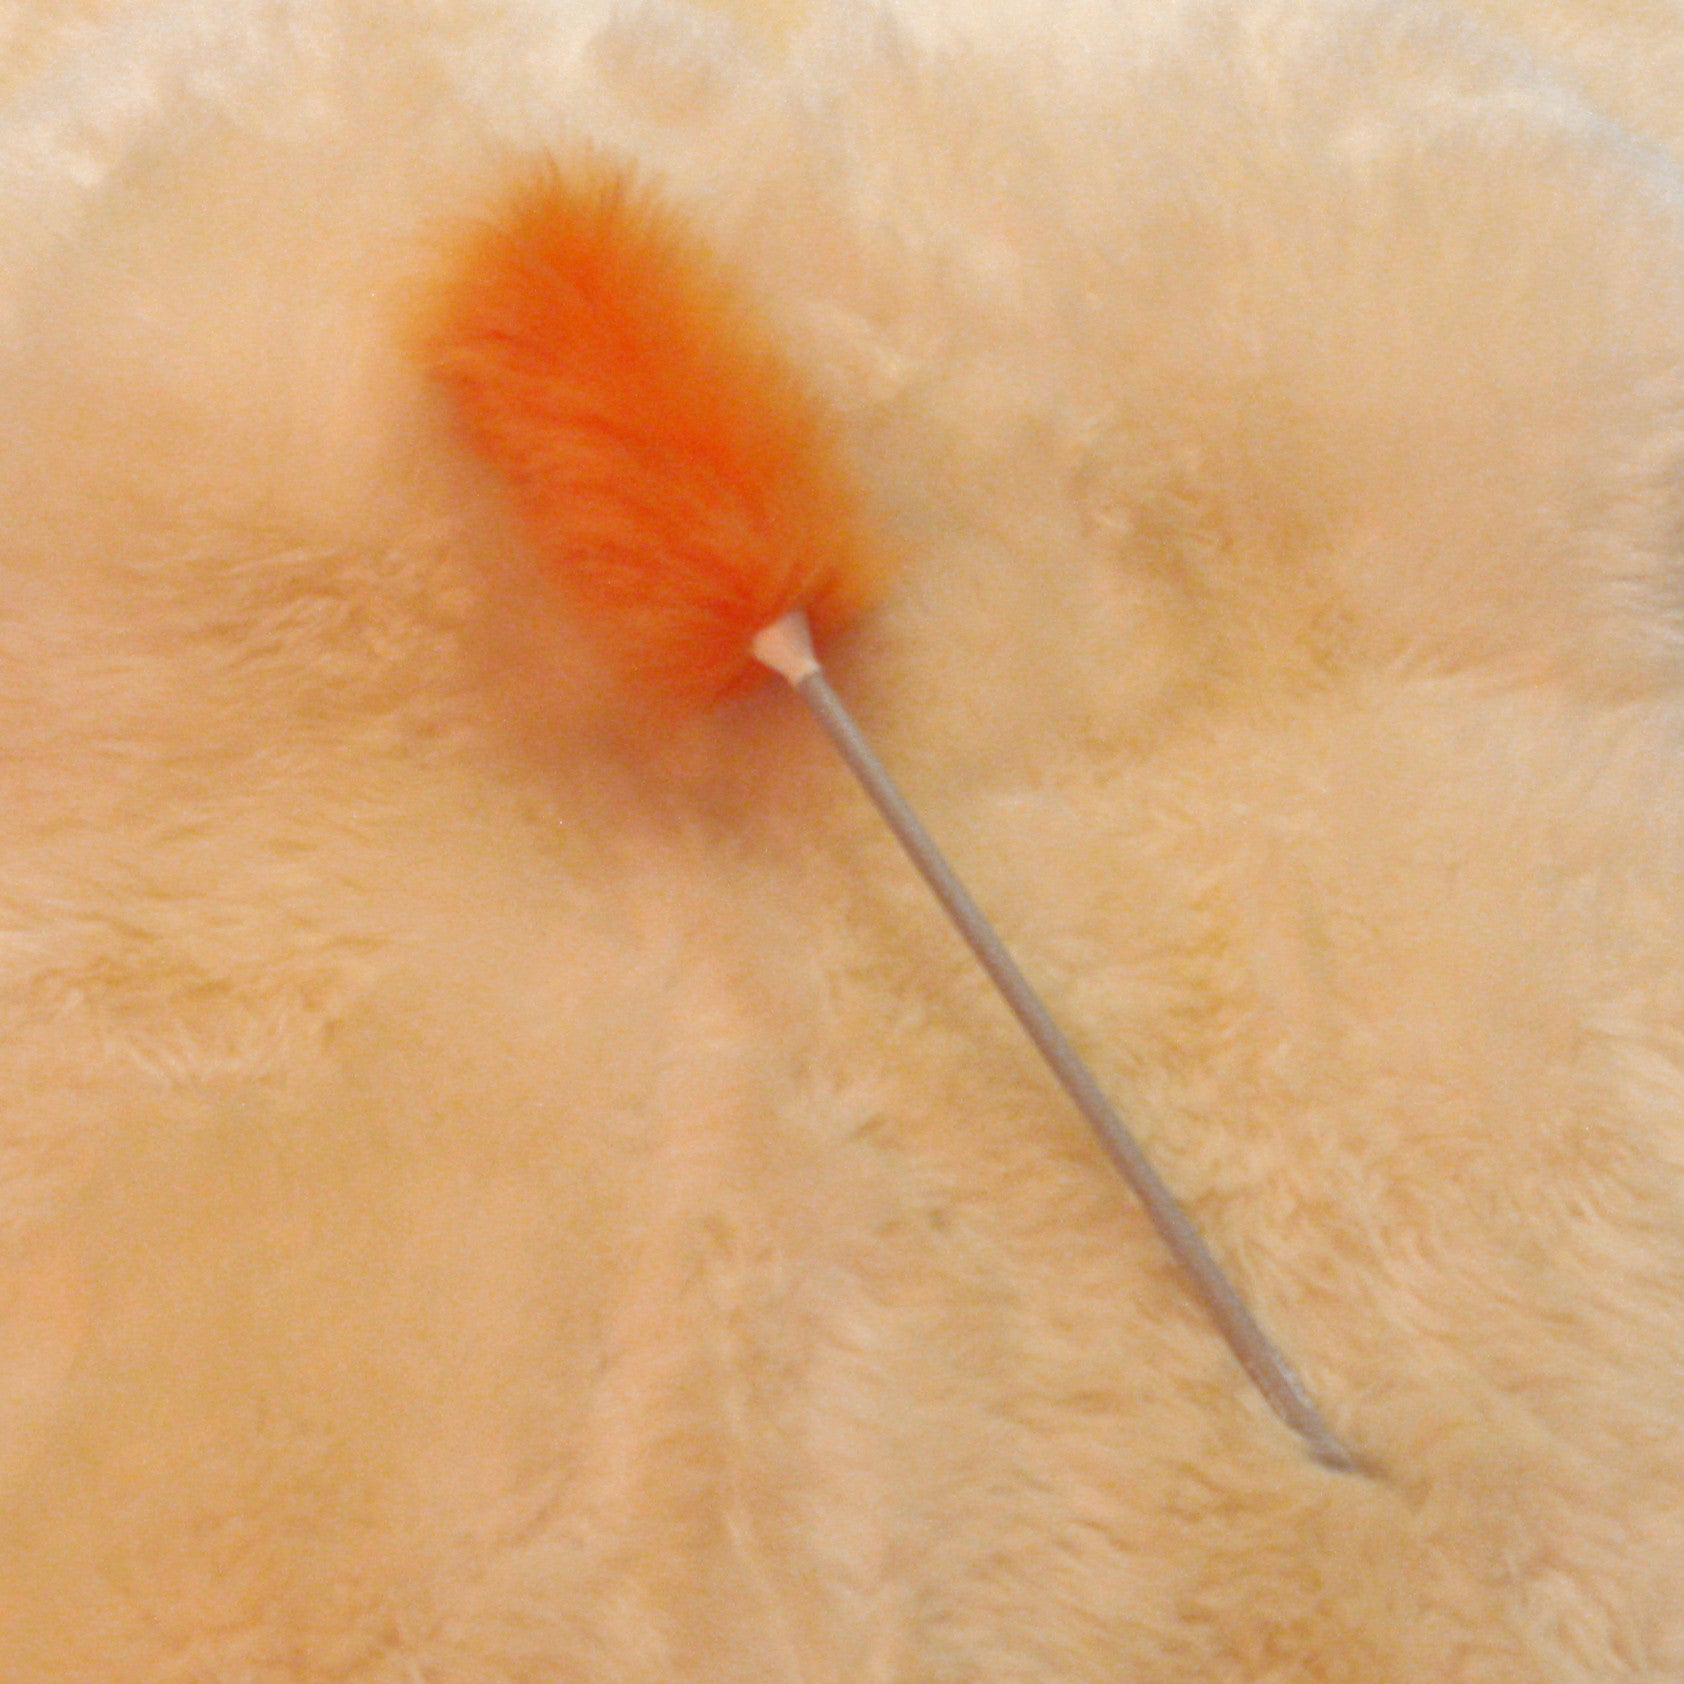 34UL Feather Duster – Frostbite Canada